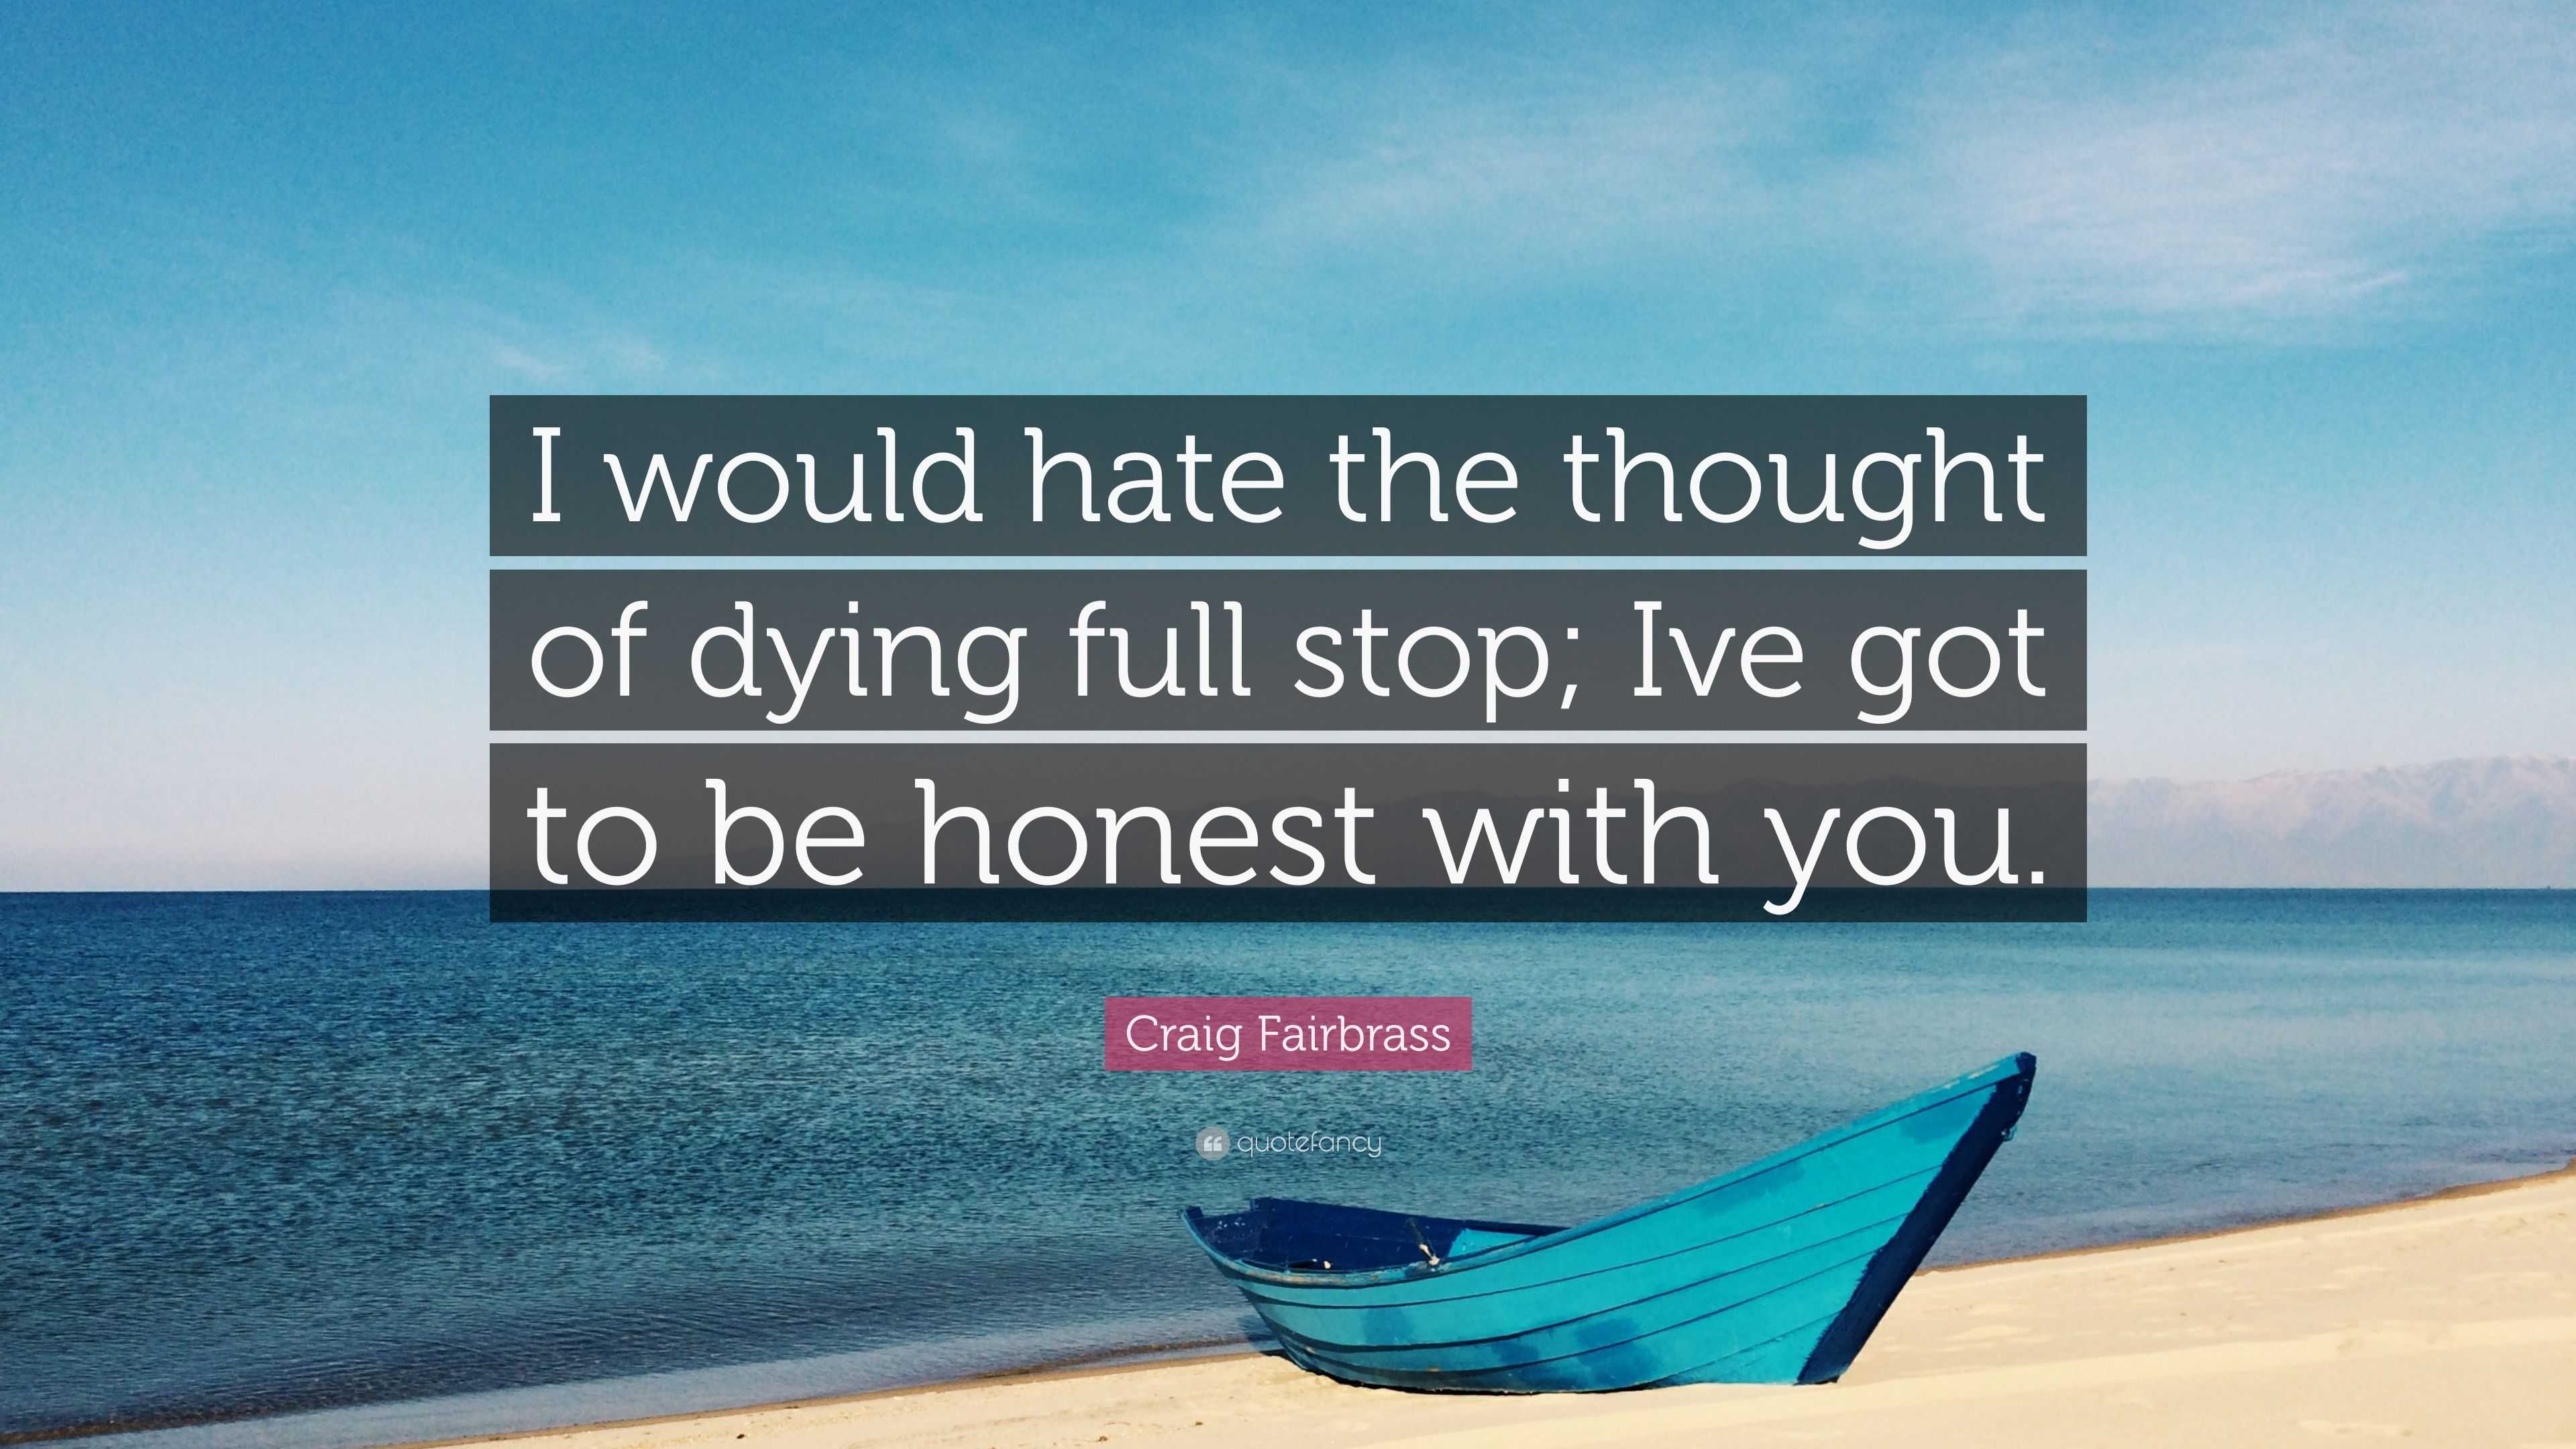 Craig Fairbrass Quote: “I would hate the thought of dying full stop ...